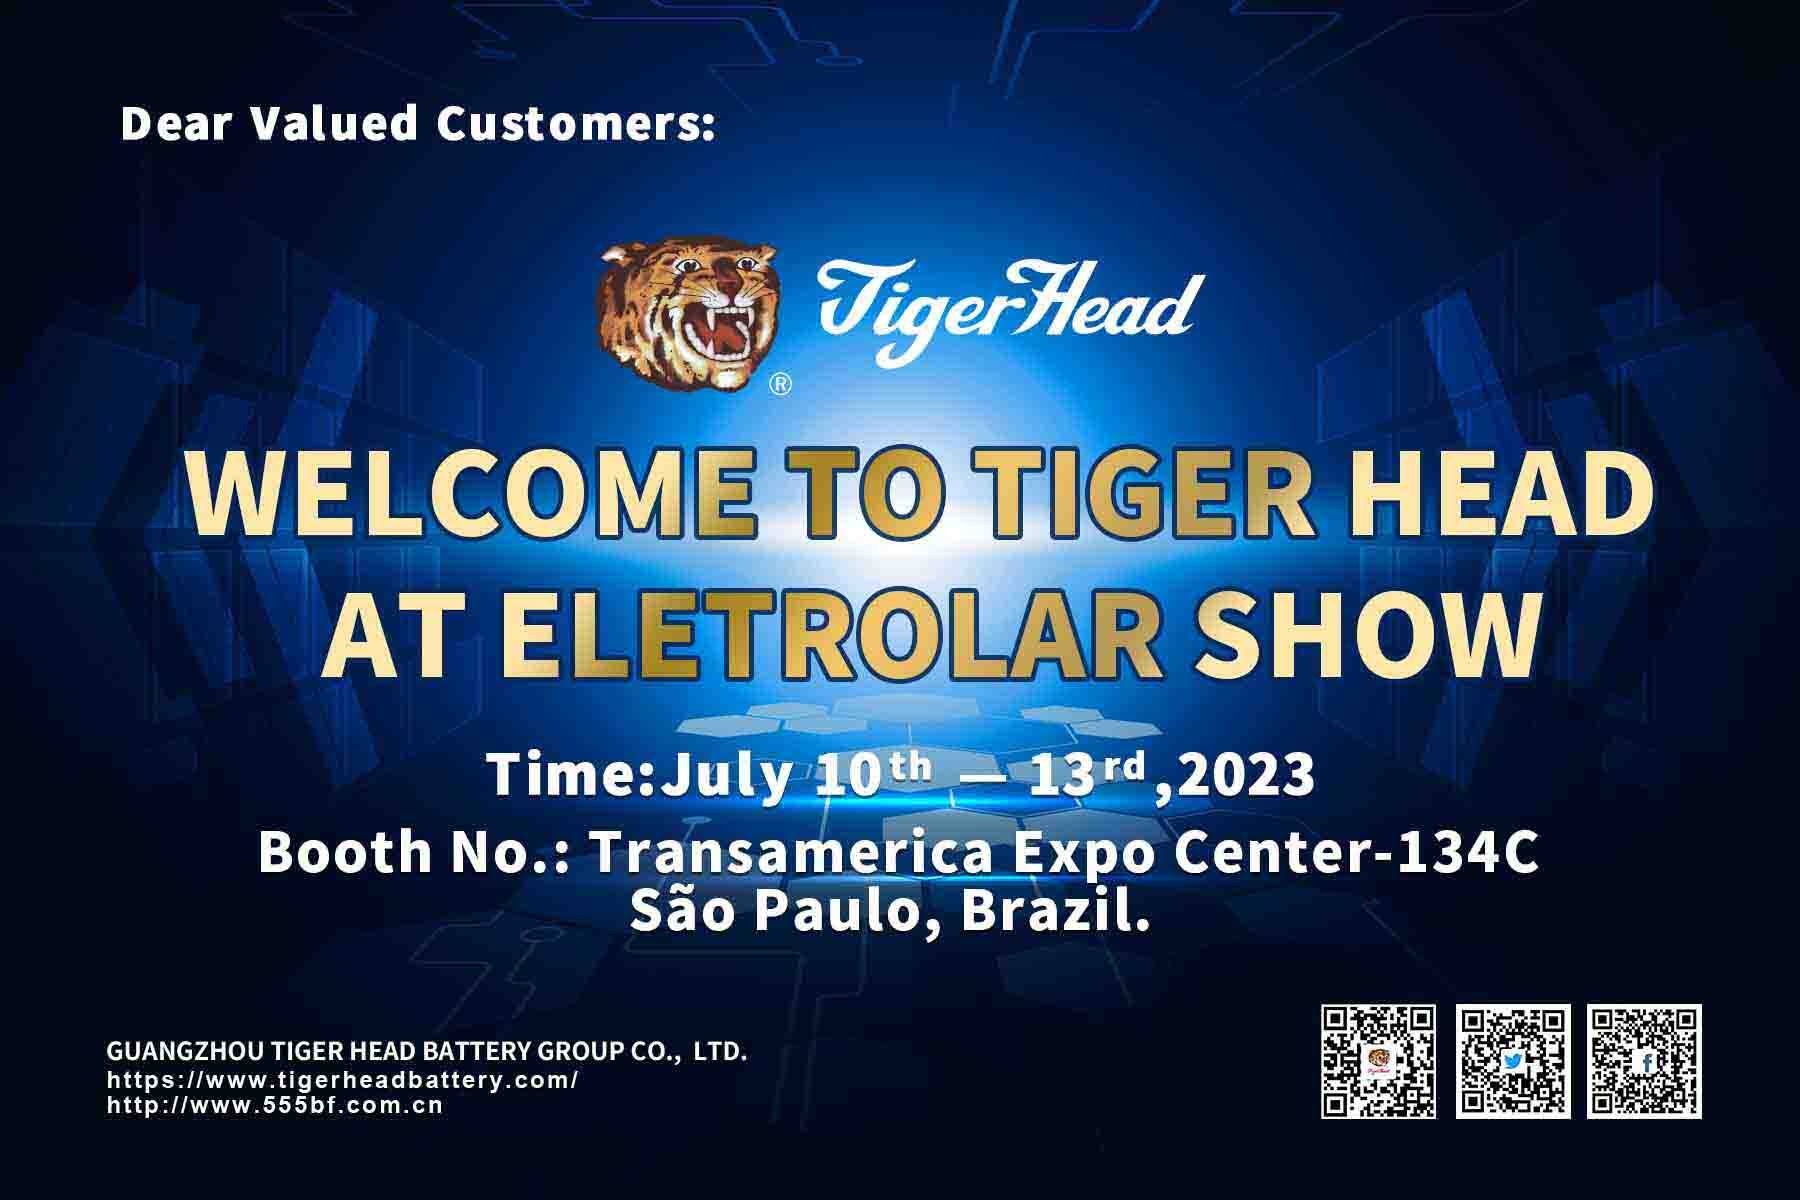 Tiger Head Battery invite you to visit our exhibition at Eletrolar Show in Sao Paulo, Brazil